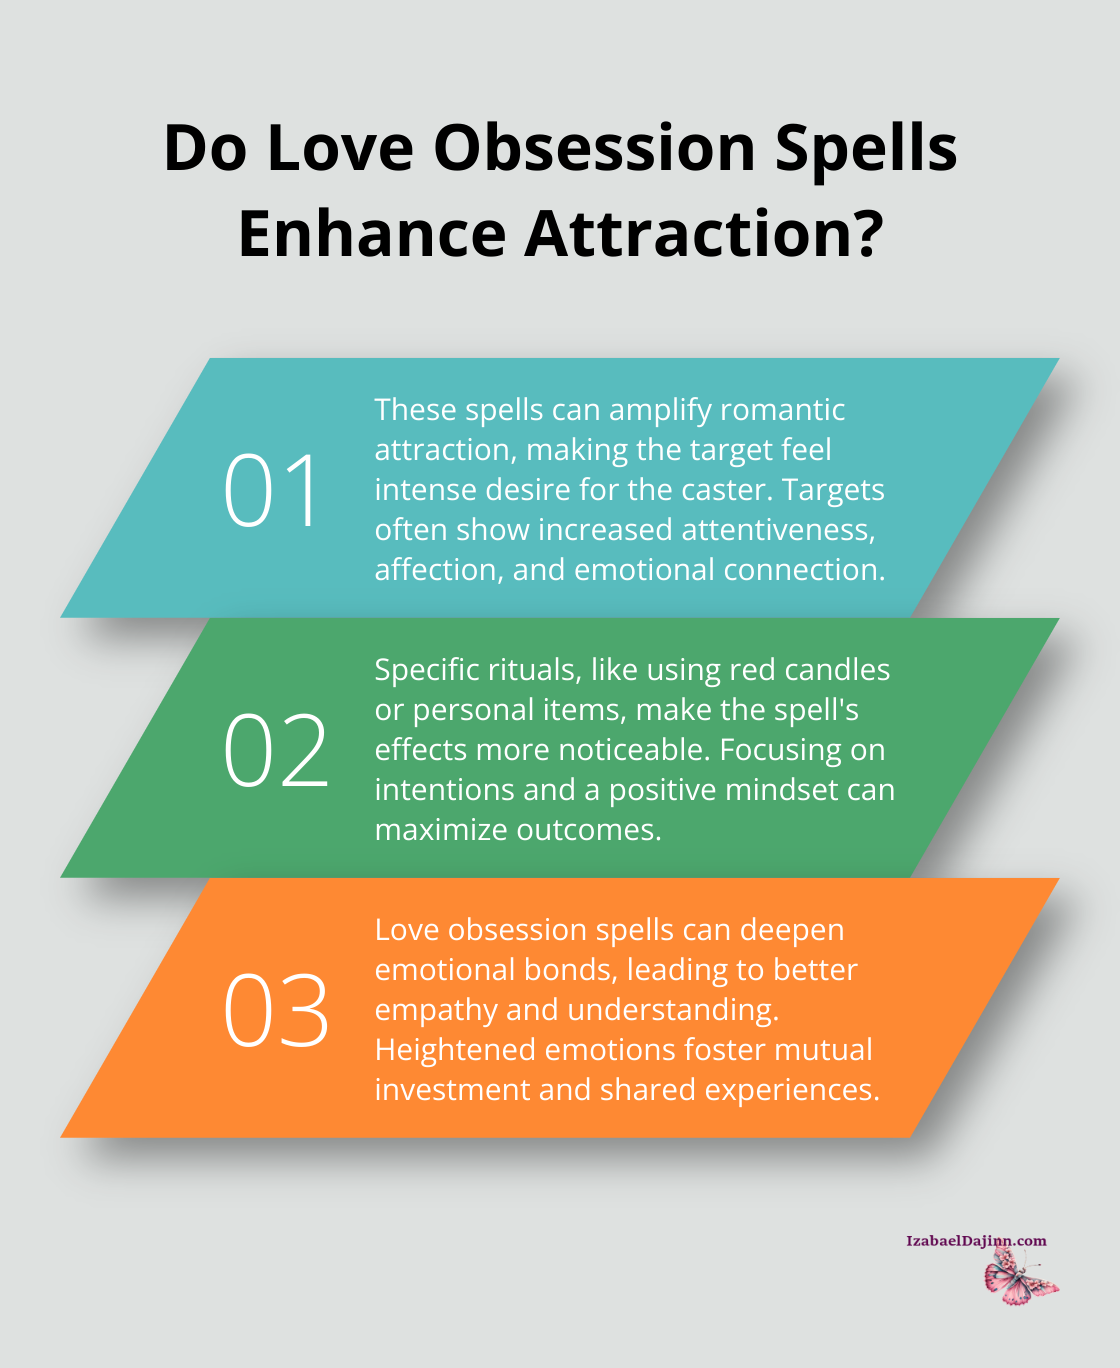 Fact - Do Love Obsession Spells Enhance Attraction?